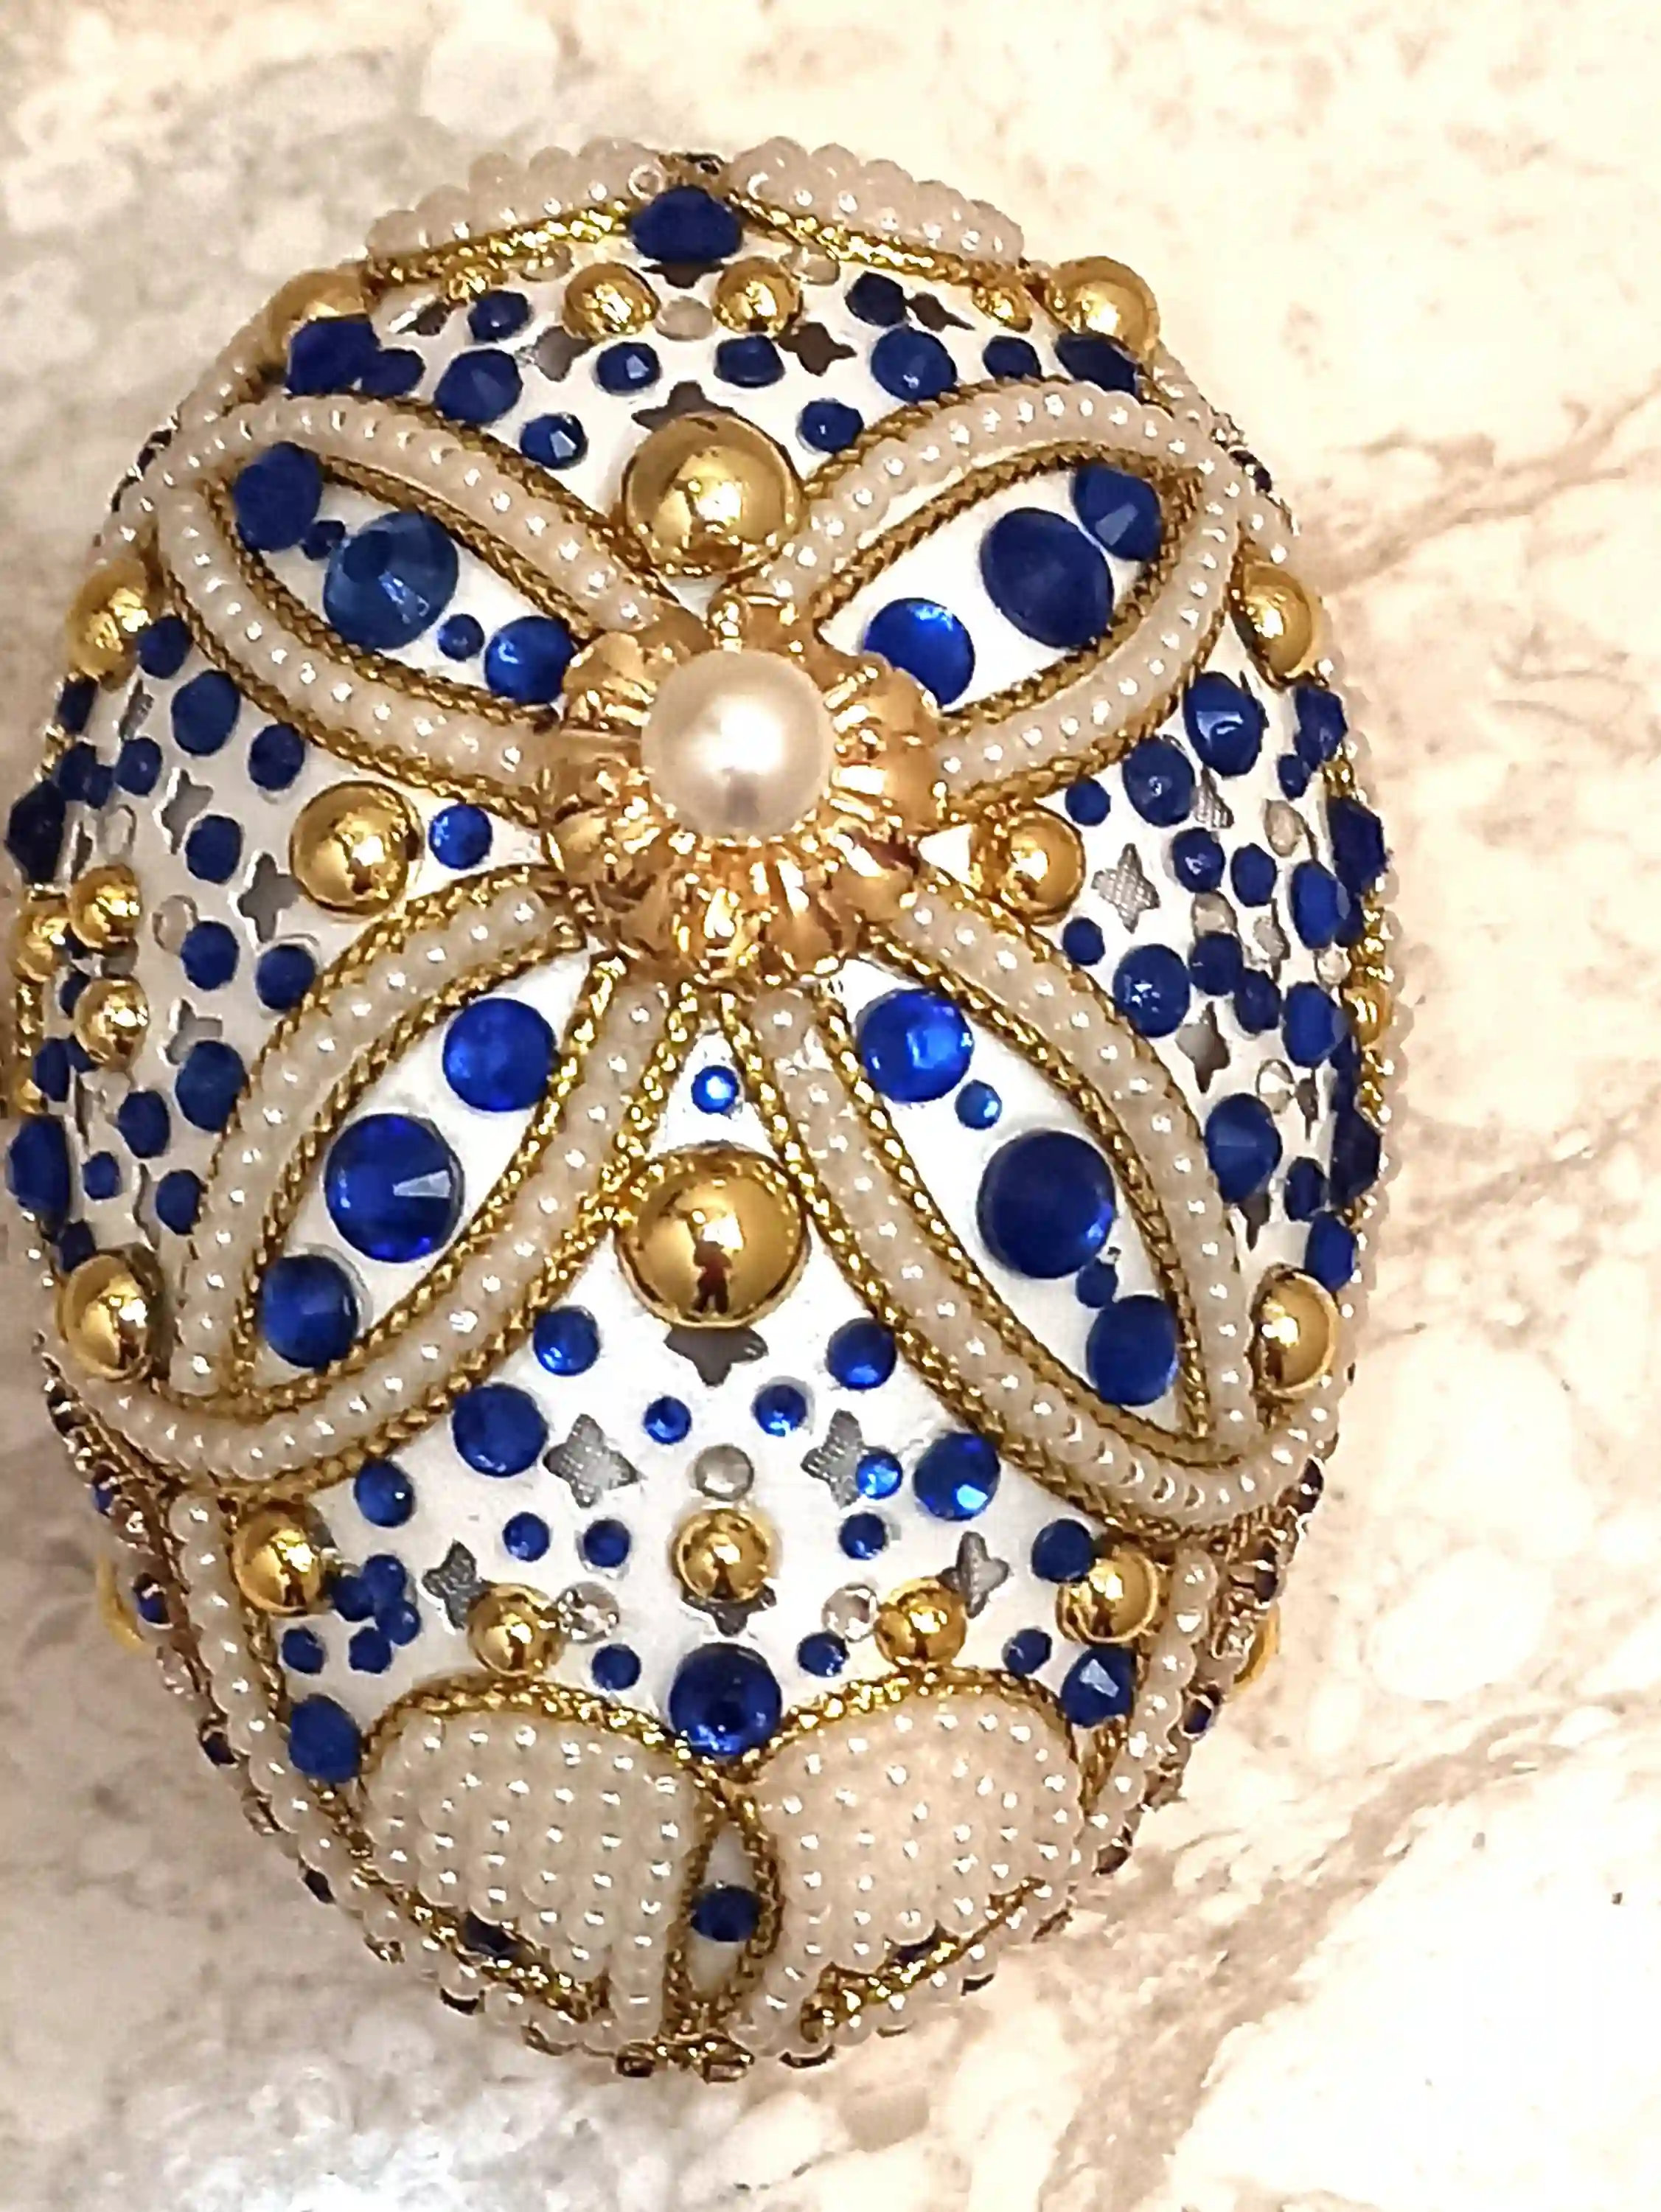 RARE-Limited Edition-Faberge Egg- Faberge Easter Egg-Faberge Style Egg-Faberge egg Trinket Box-Faberge Egg Music Box-24k GOLD-Sapphire Gift 